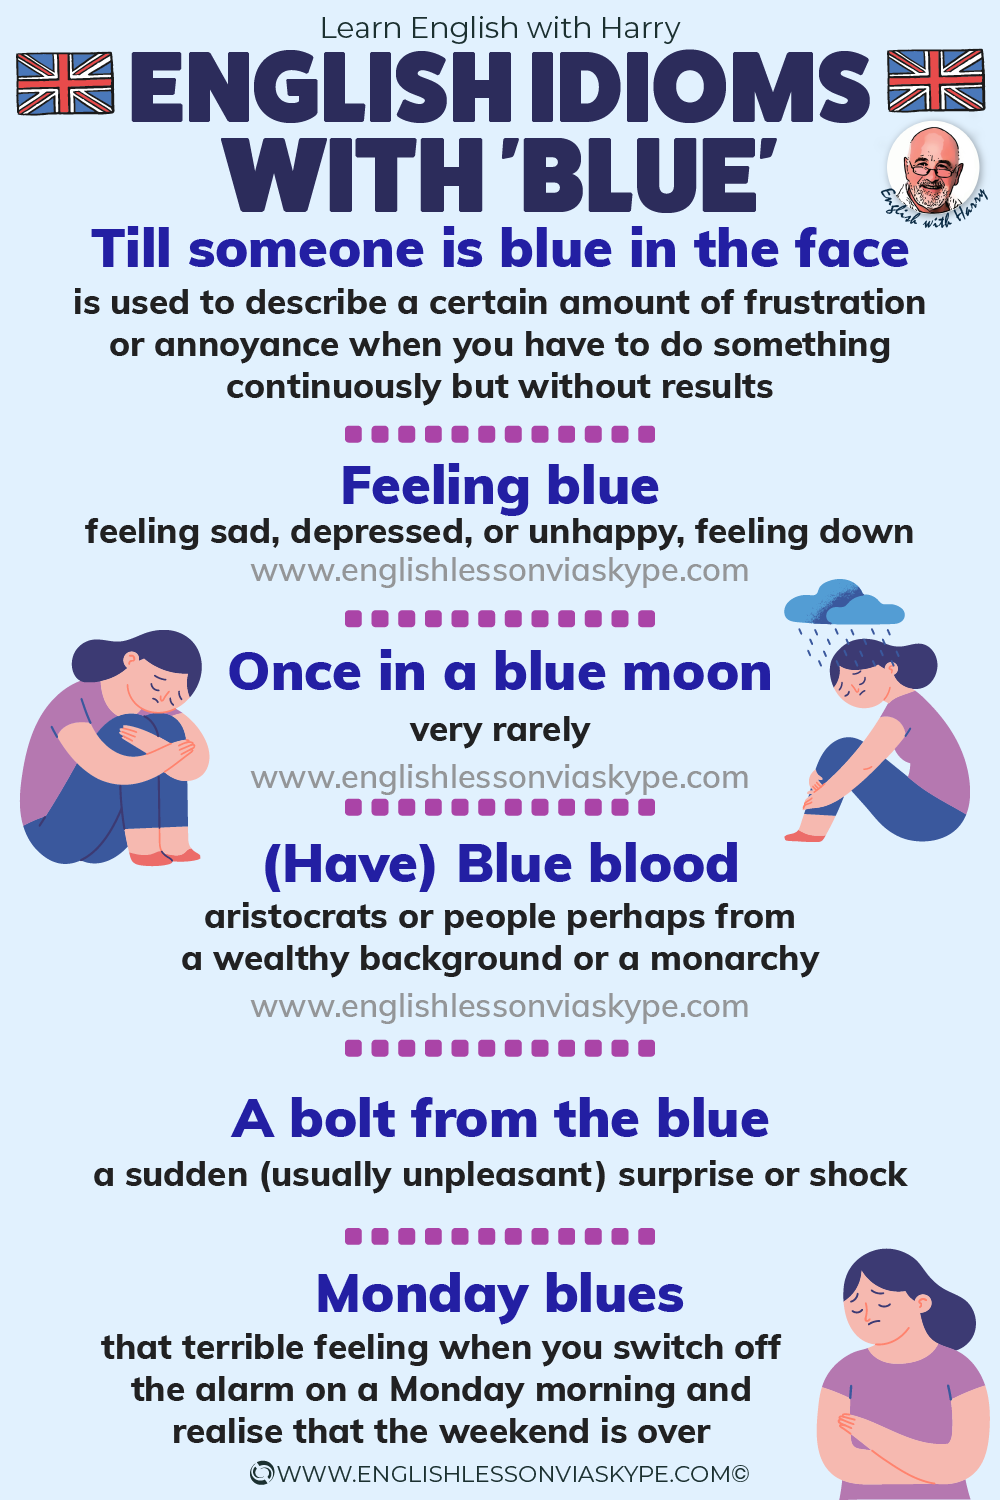 English idioms with blue in them. English colour idioms. From intermediate to advanced English with www.englishlessonviaskype.com #learnenglish #englishlessons #EnglishTeacher #vocabulary #ingles #อังกฤษ #английский #aprenderingles #english #cursodeingles #учианглийский #vocabulário #dicasdeingles #learningenglish #ingilizce #englishgrammar #englishvocabulary #ielts #idiomas